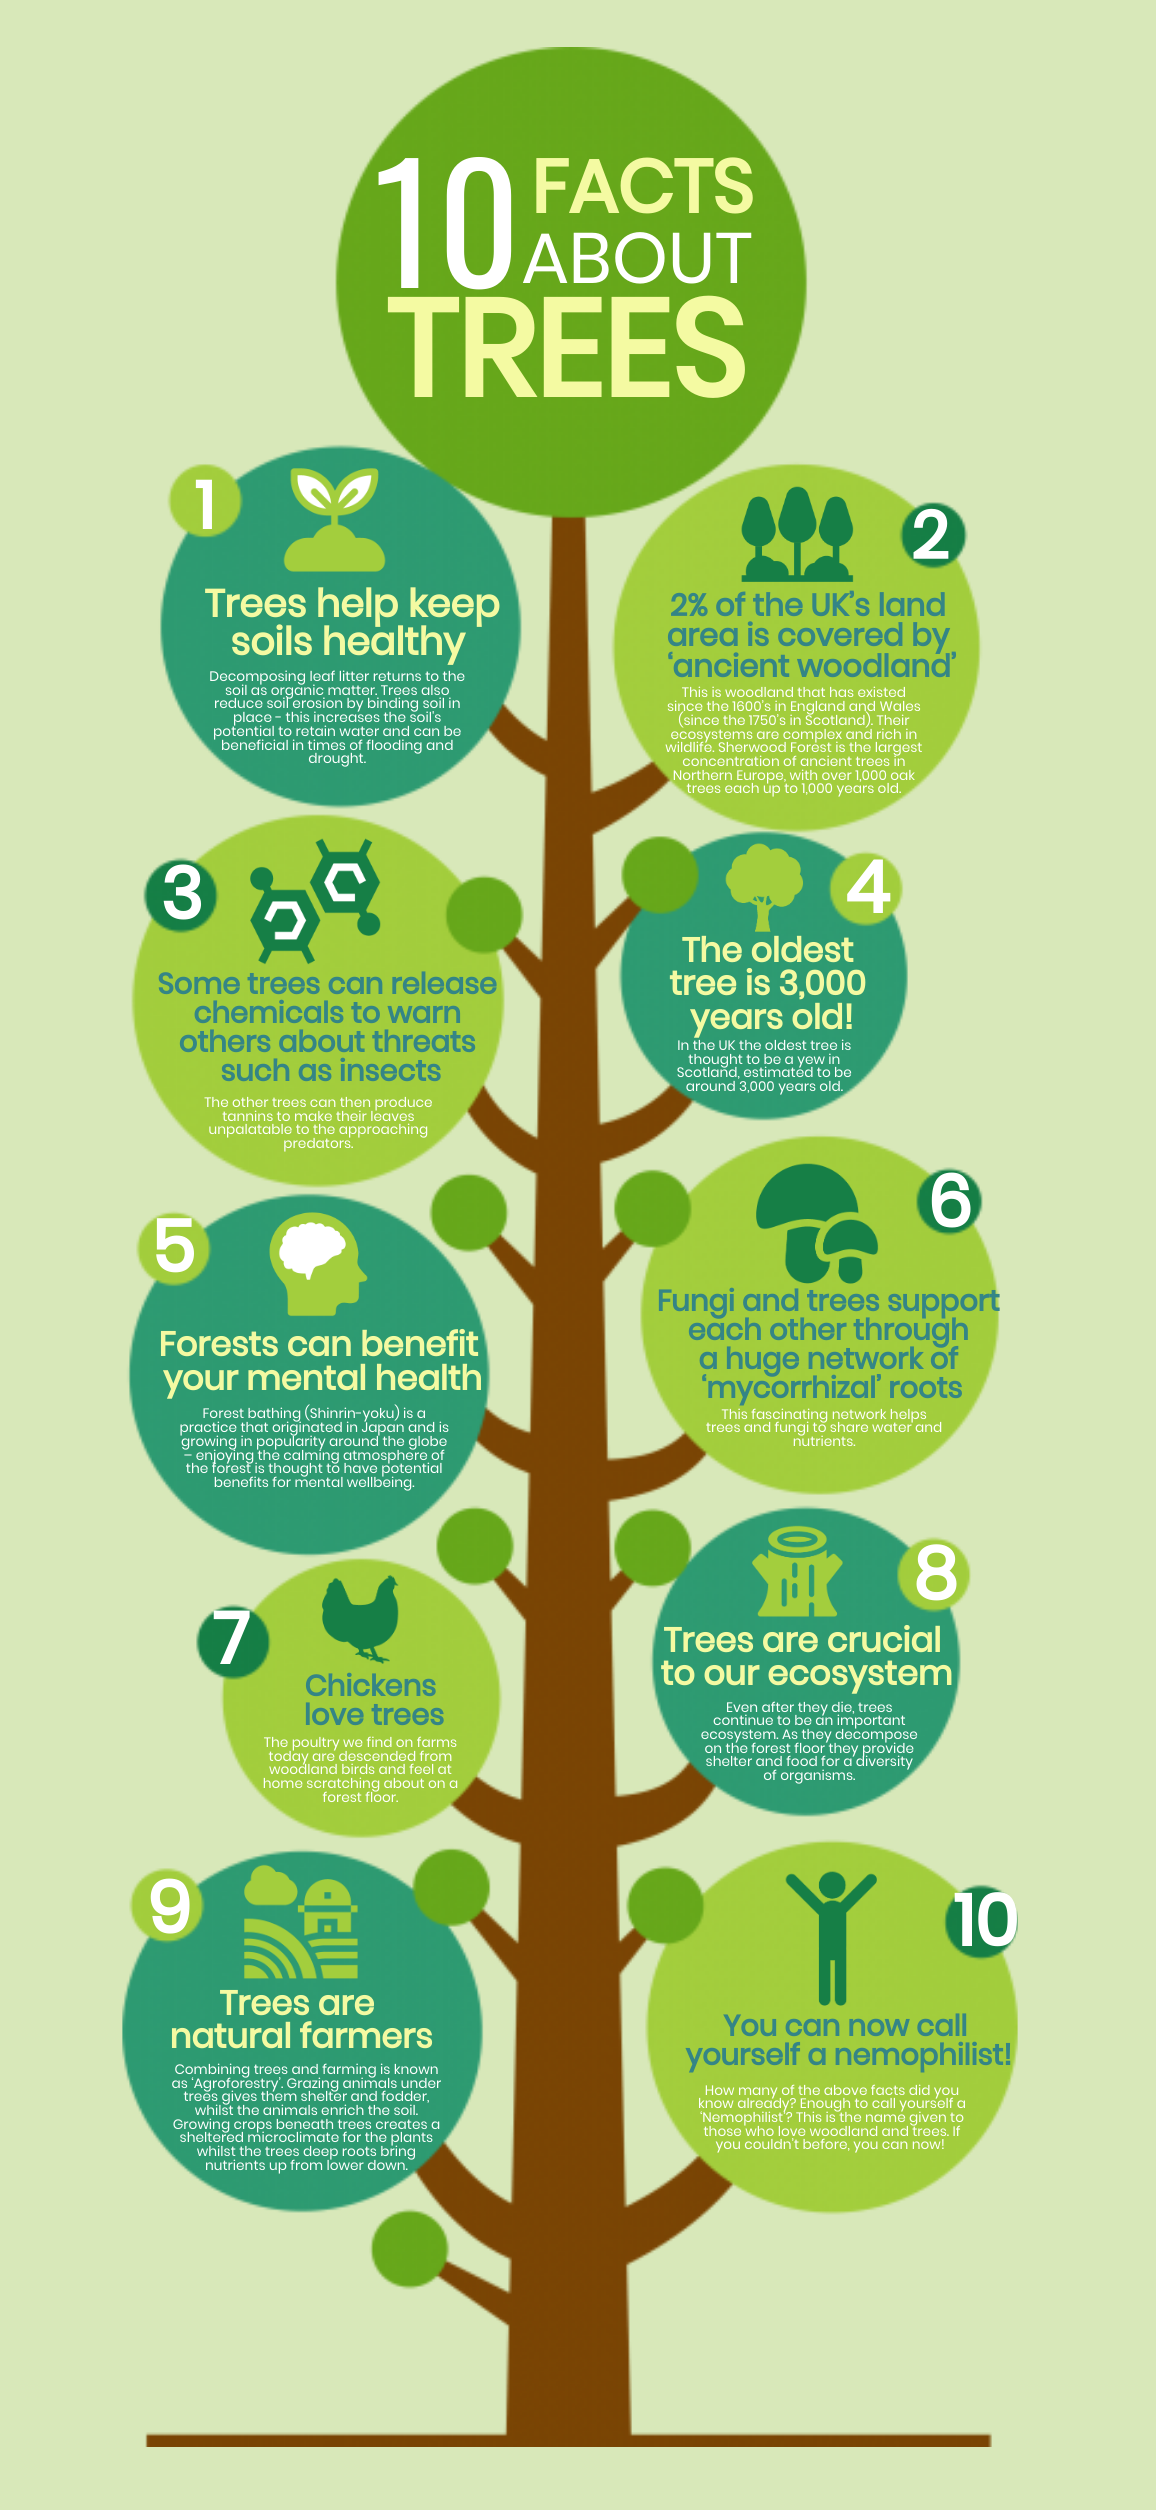 7 Fun Facts About Trees Facts For Kids Leaves Redwoods Fall | Images ...